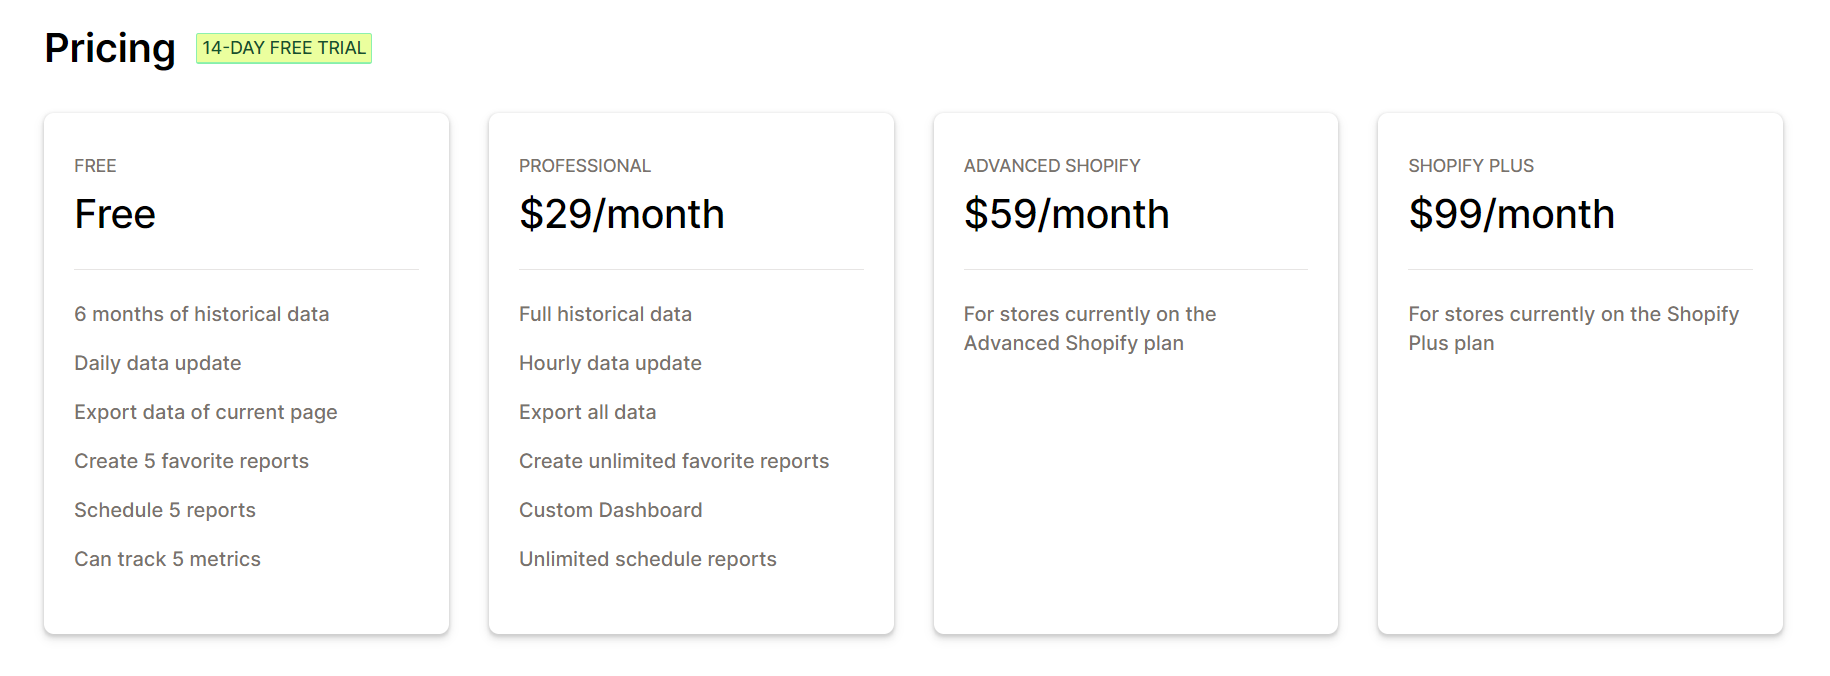 Reports: Inventory & Sales Shopify pricing options